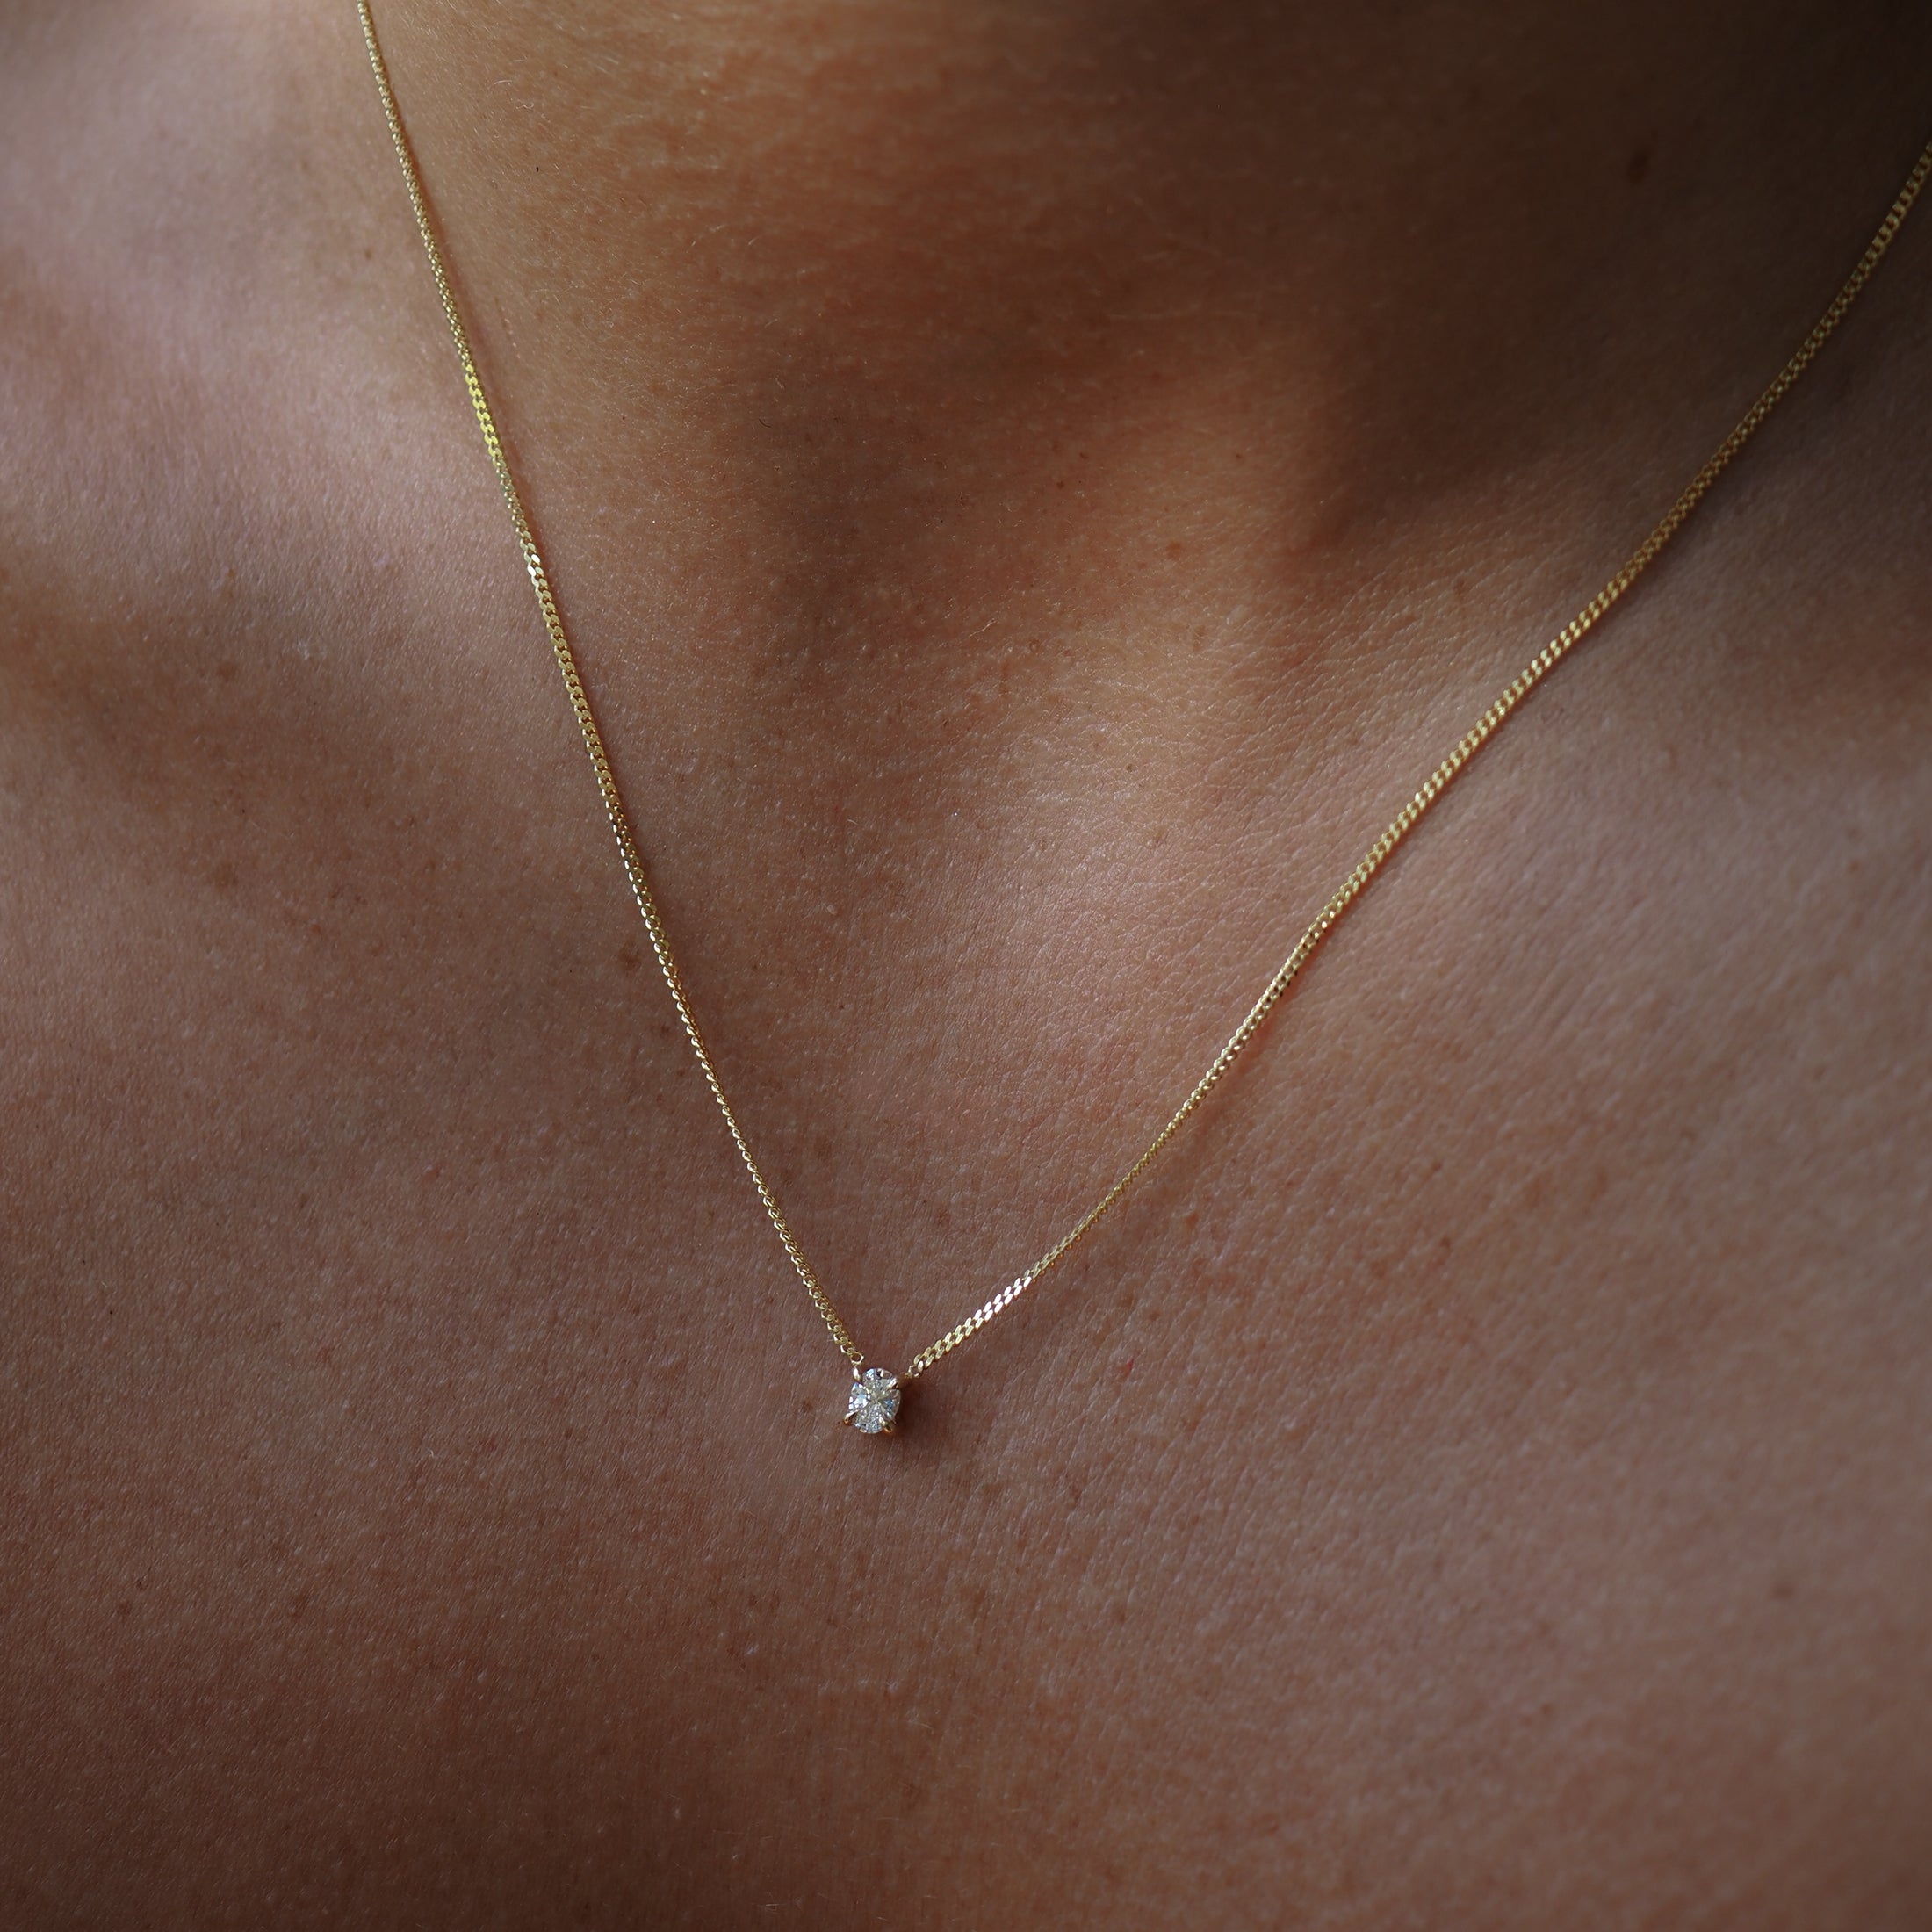 Oval lab-grown diamond necklace, handset within four claws and featured on yellow gold chain. 